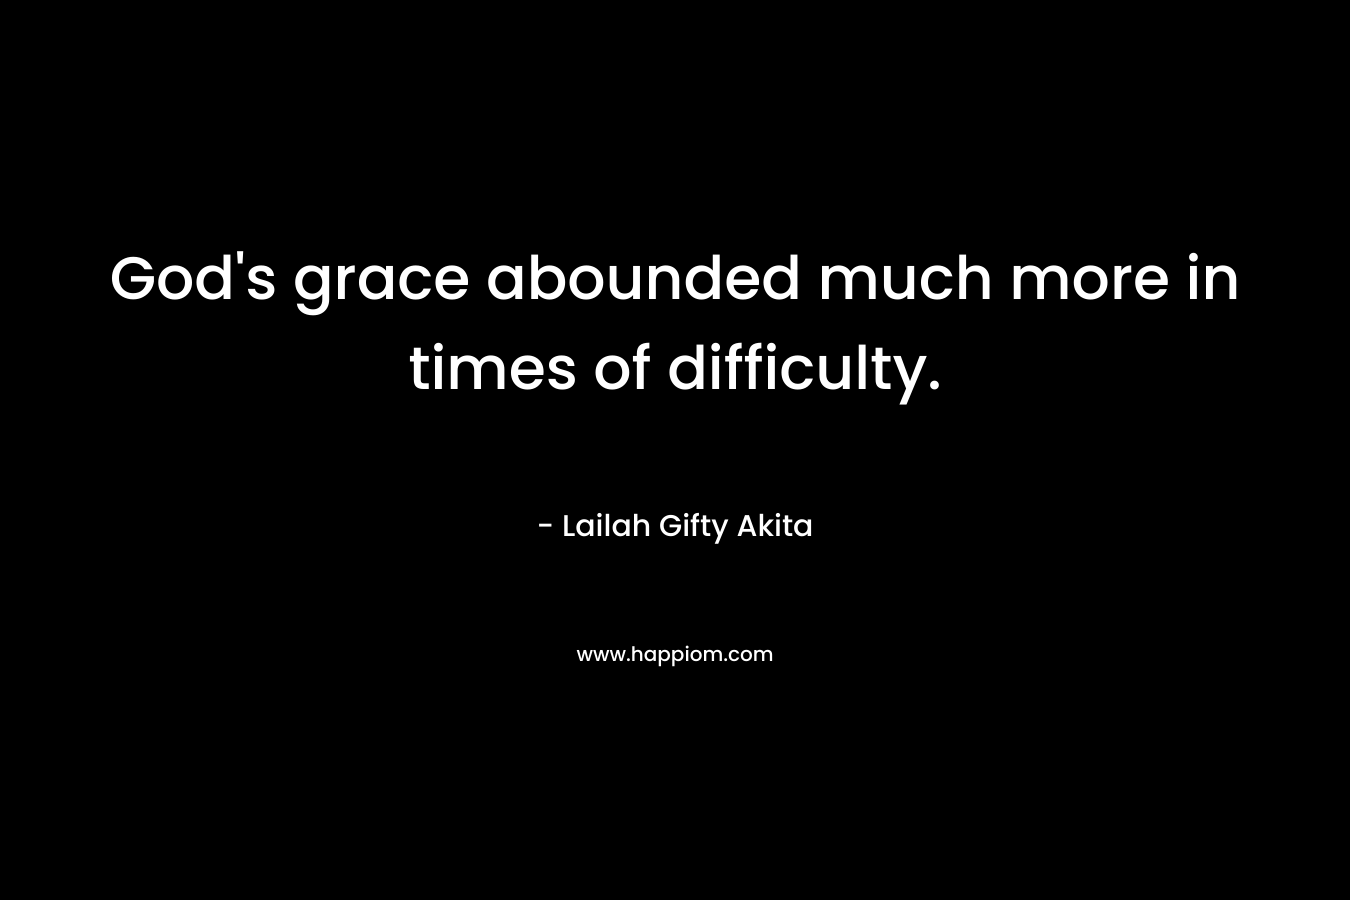 God’s grace abounded much more in times of difficulty. – Lailah Gifty Akita